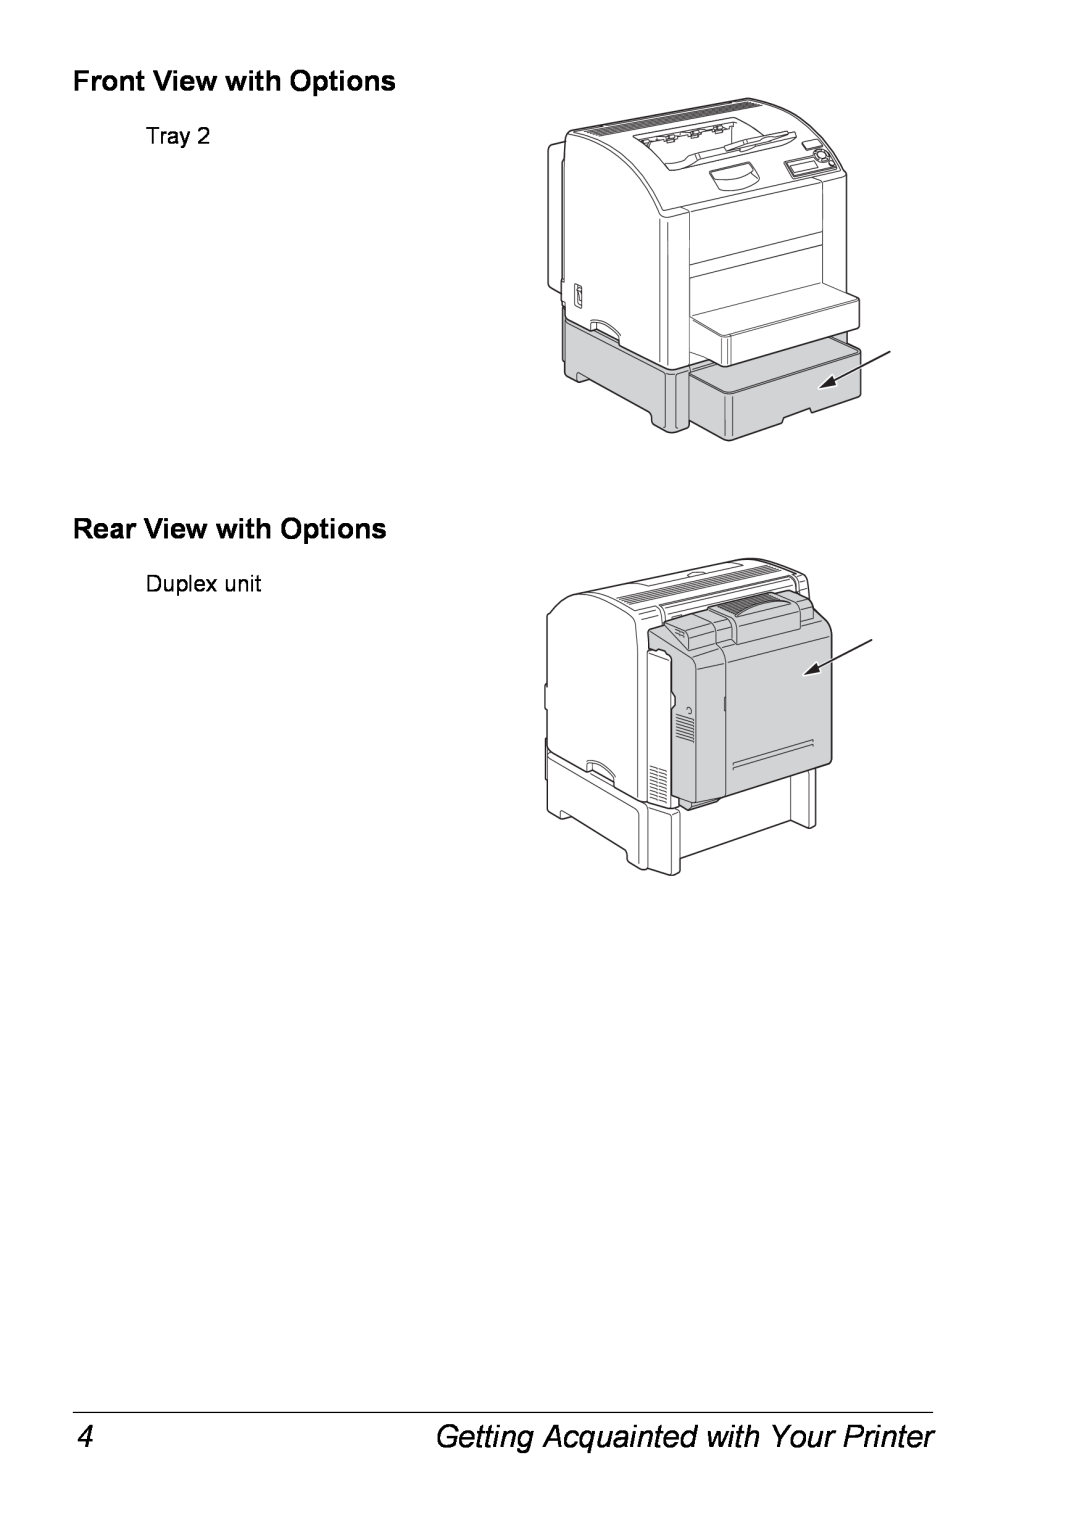 Xerox 6120 manual Front View with Options, Rear View with Options, Getting Acquainted with Your Printer 